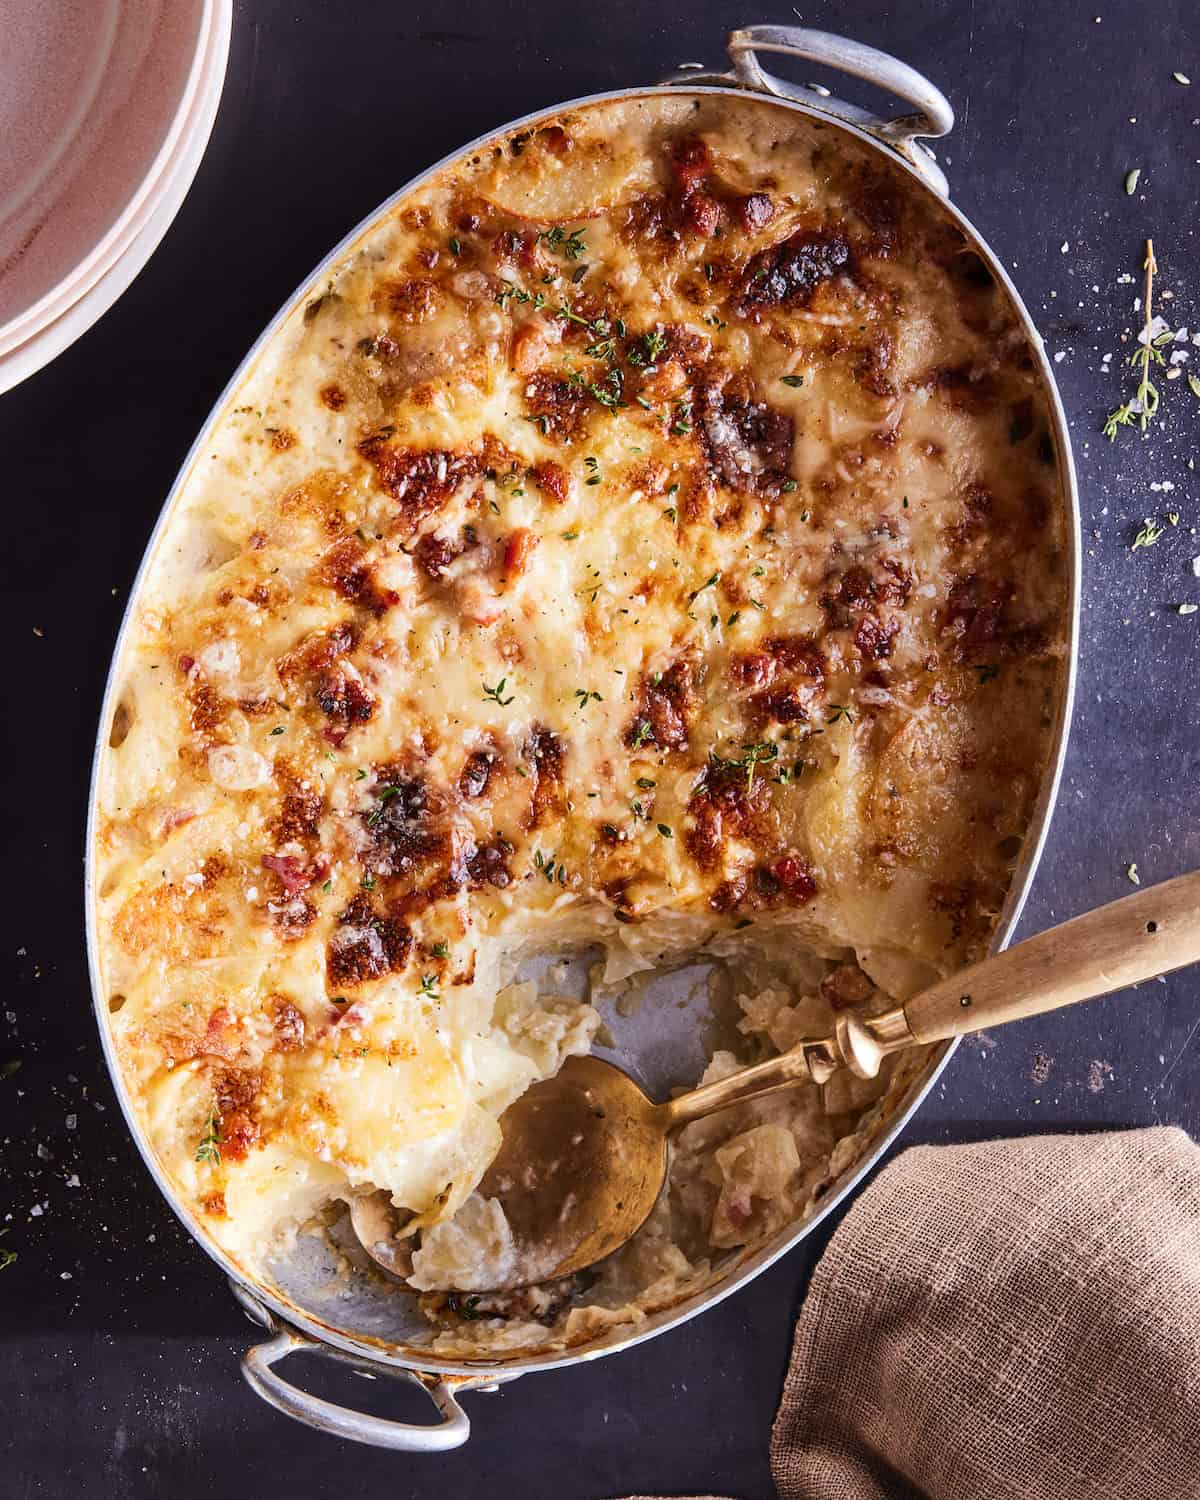 An oval dish with potatoes au gratin with some servings taken out, and a serving spoon.